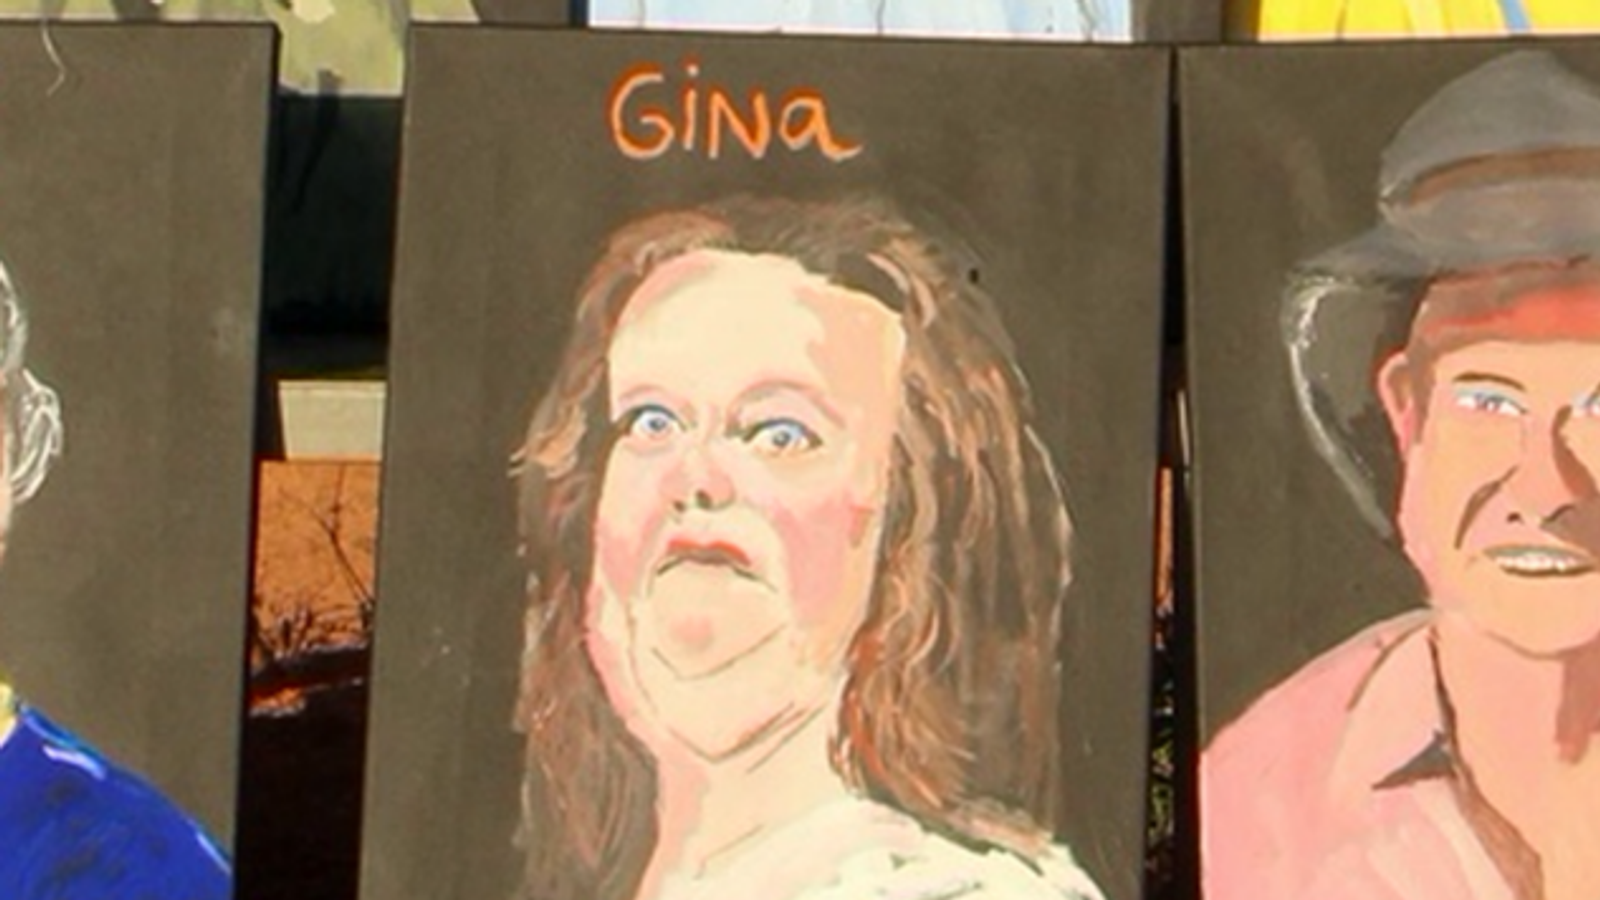 Gina Rinehart portrait: Gallery faces growing pressure to remove unflattering painting of billionaire